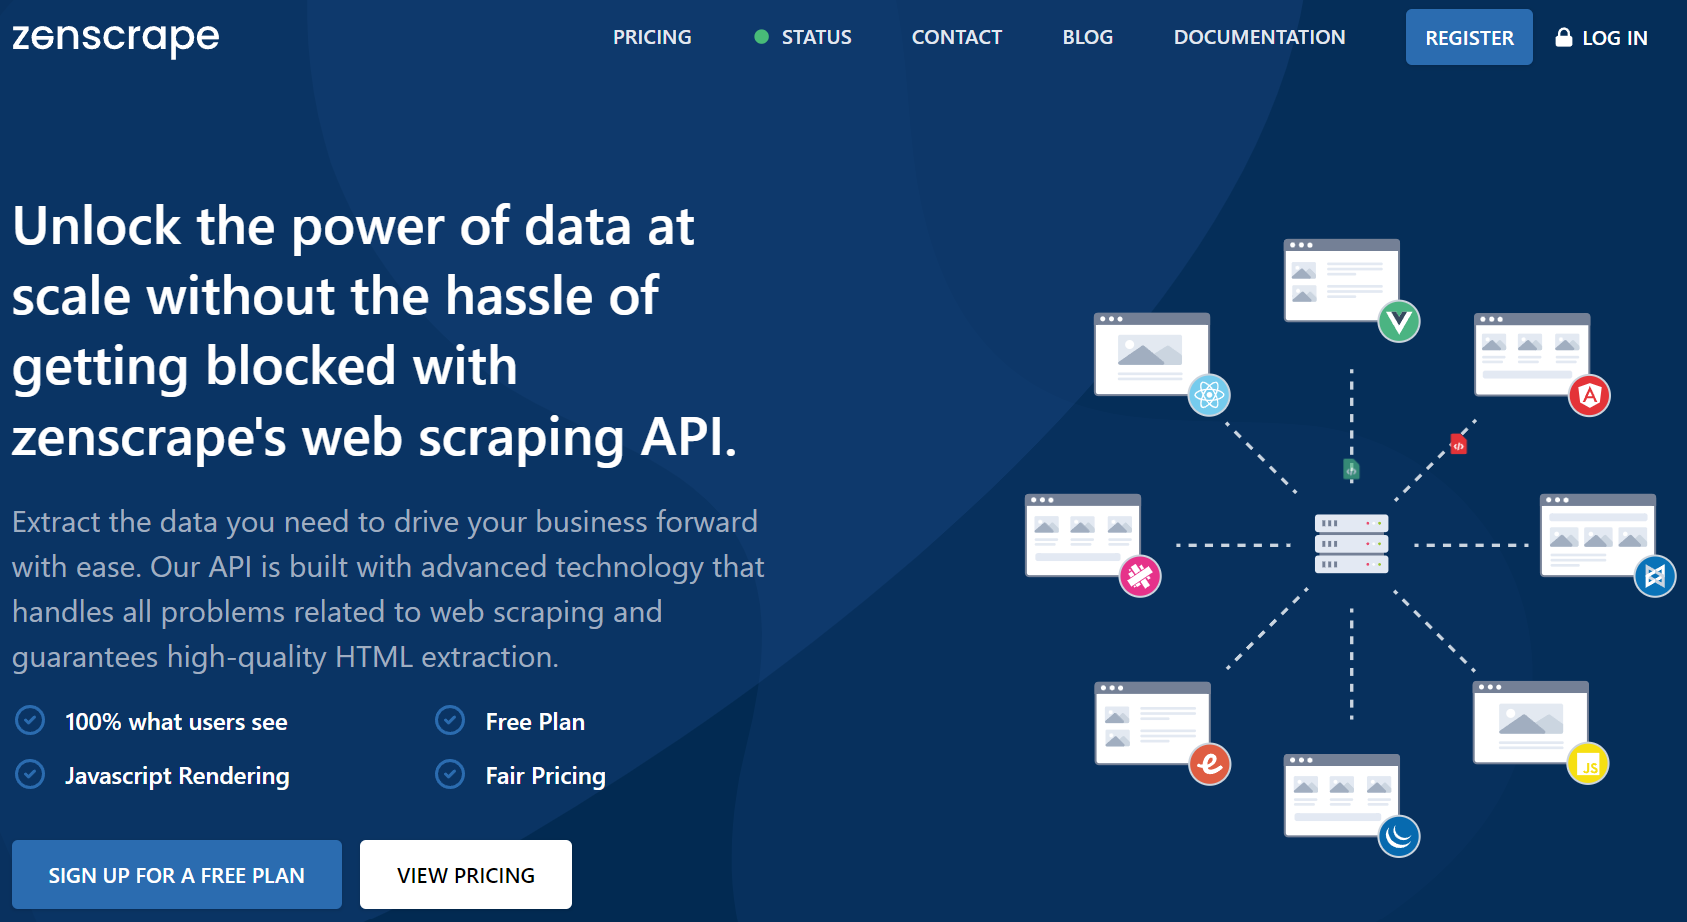 home page of the zenscrape, one of the best web scraping tools